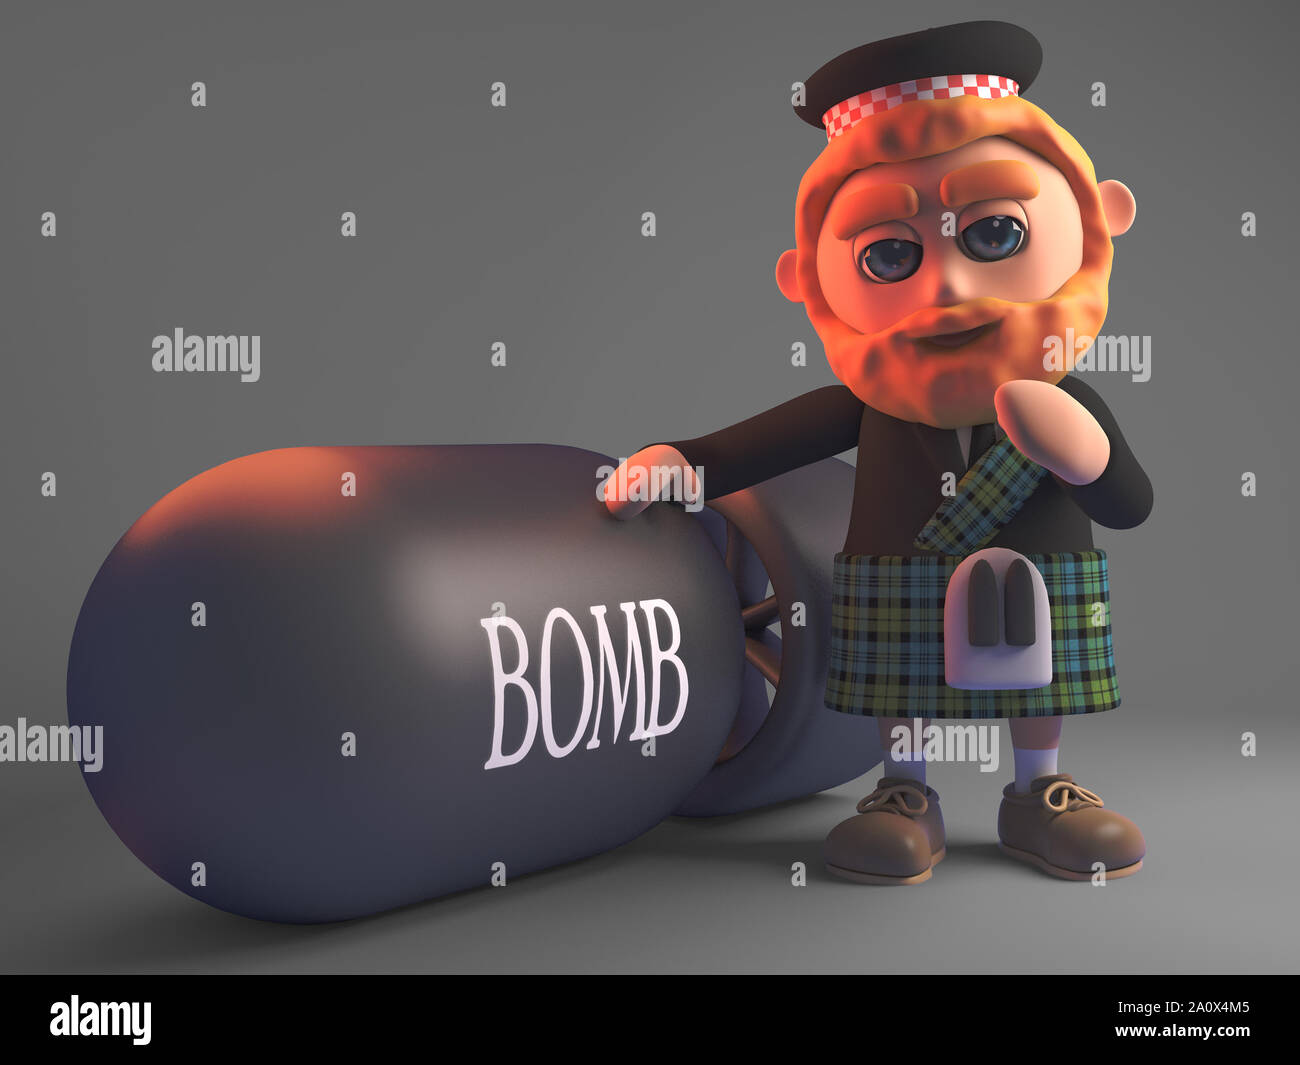 Cartoon 3d Scottish man in kilt standing next to a nuclear bomb, 3d illustration render Stock Photo